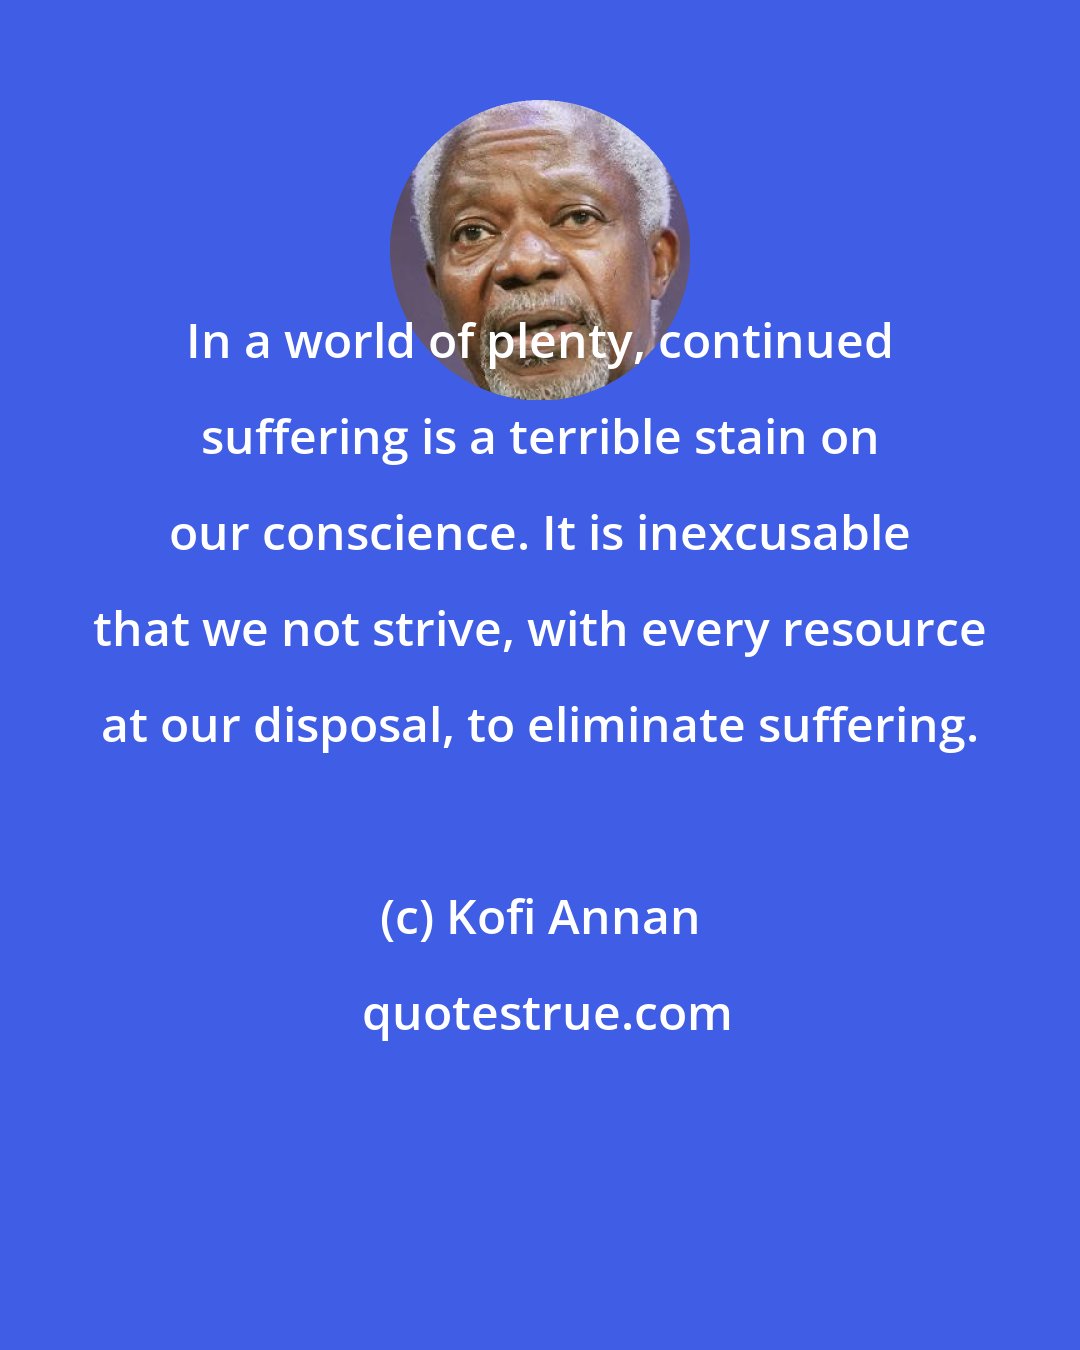 Kofi Annan: In a world of plenty, continued suffering is a terrible stain on our conscience. It is inexcusable that we not strive, with every resource at our disposal, to eliminate suffering.